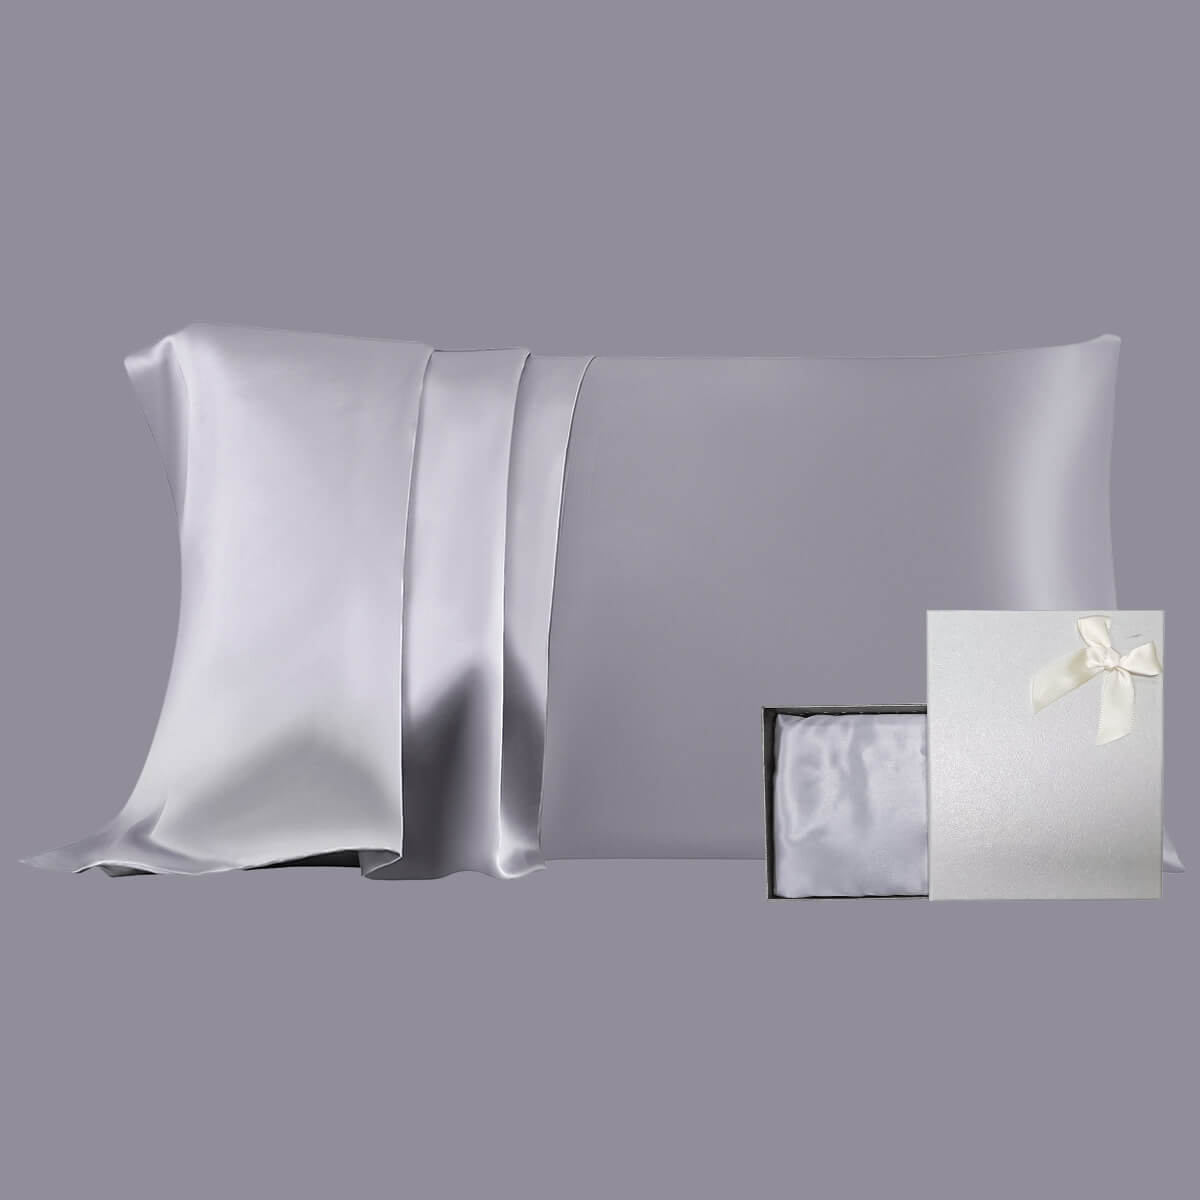 30mm 6A+ Silk Pillowcase With Zipper With Gift Box